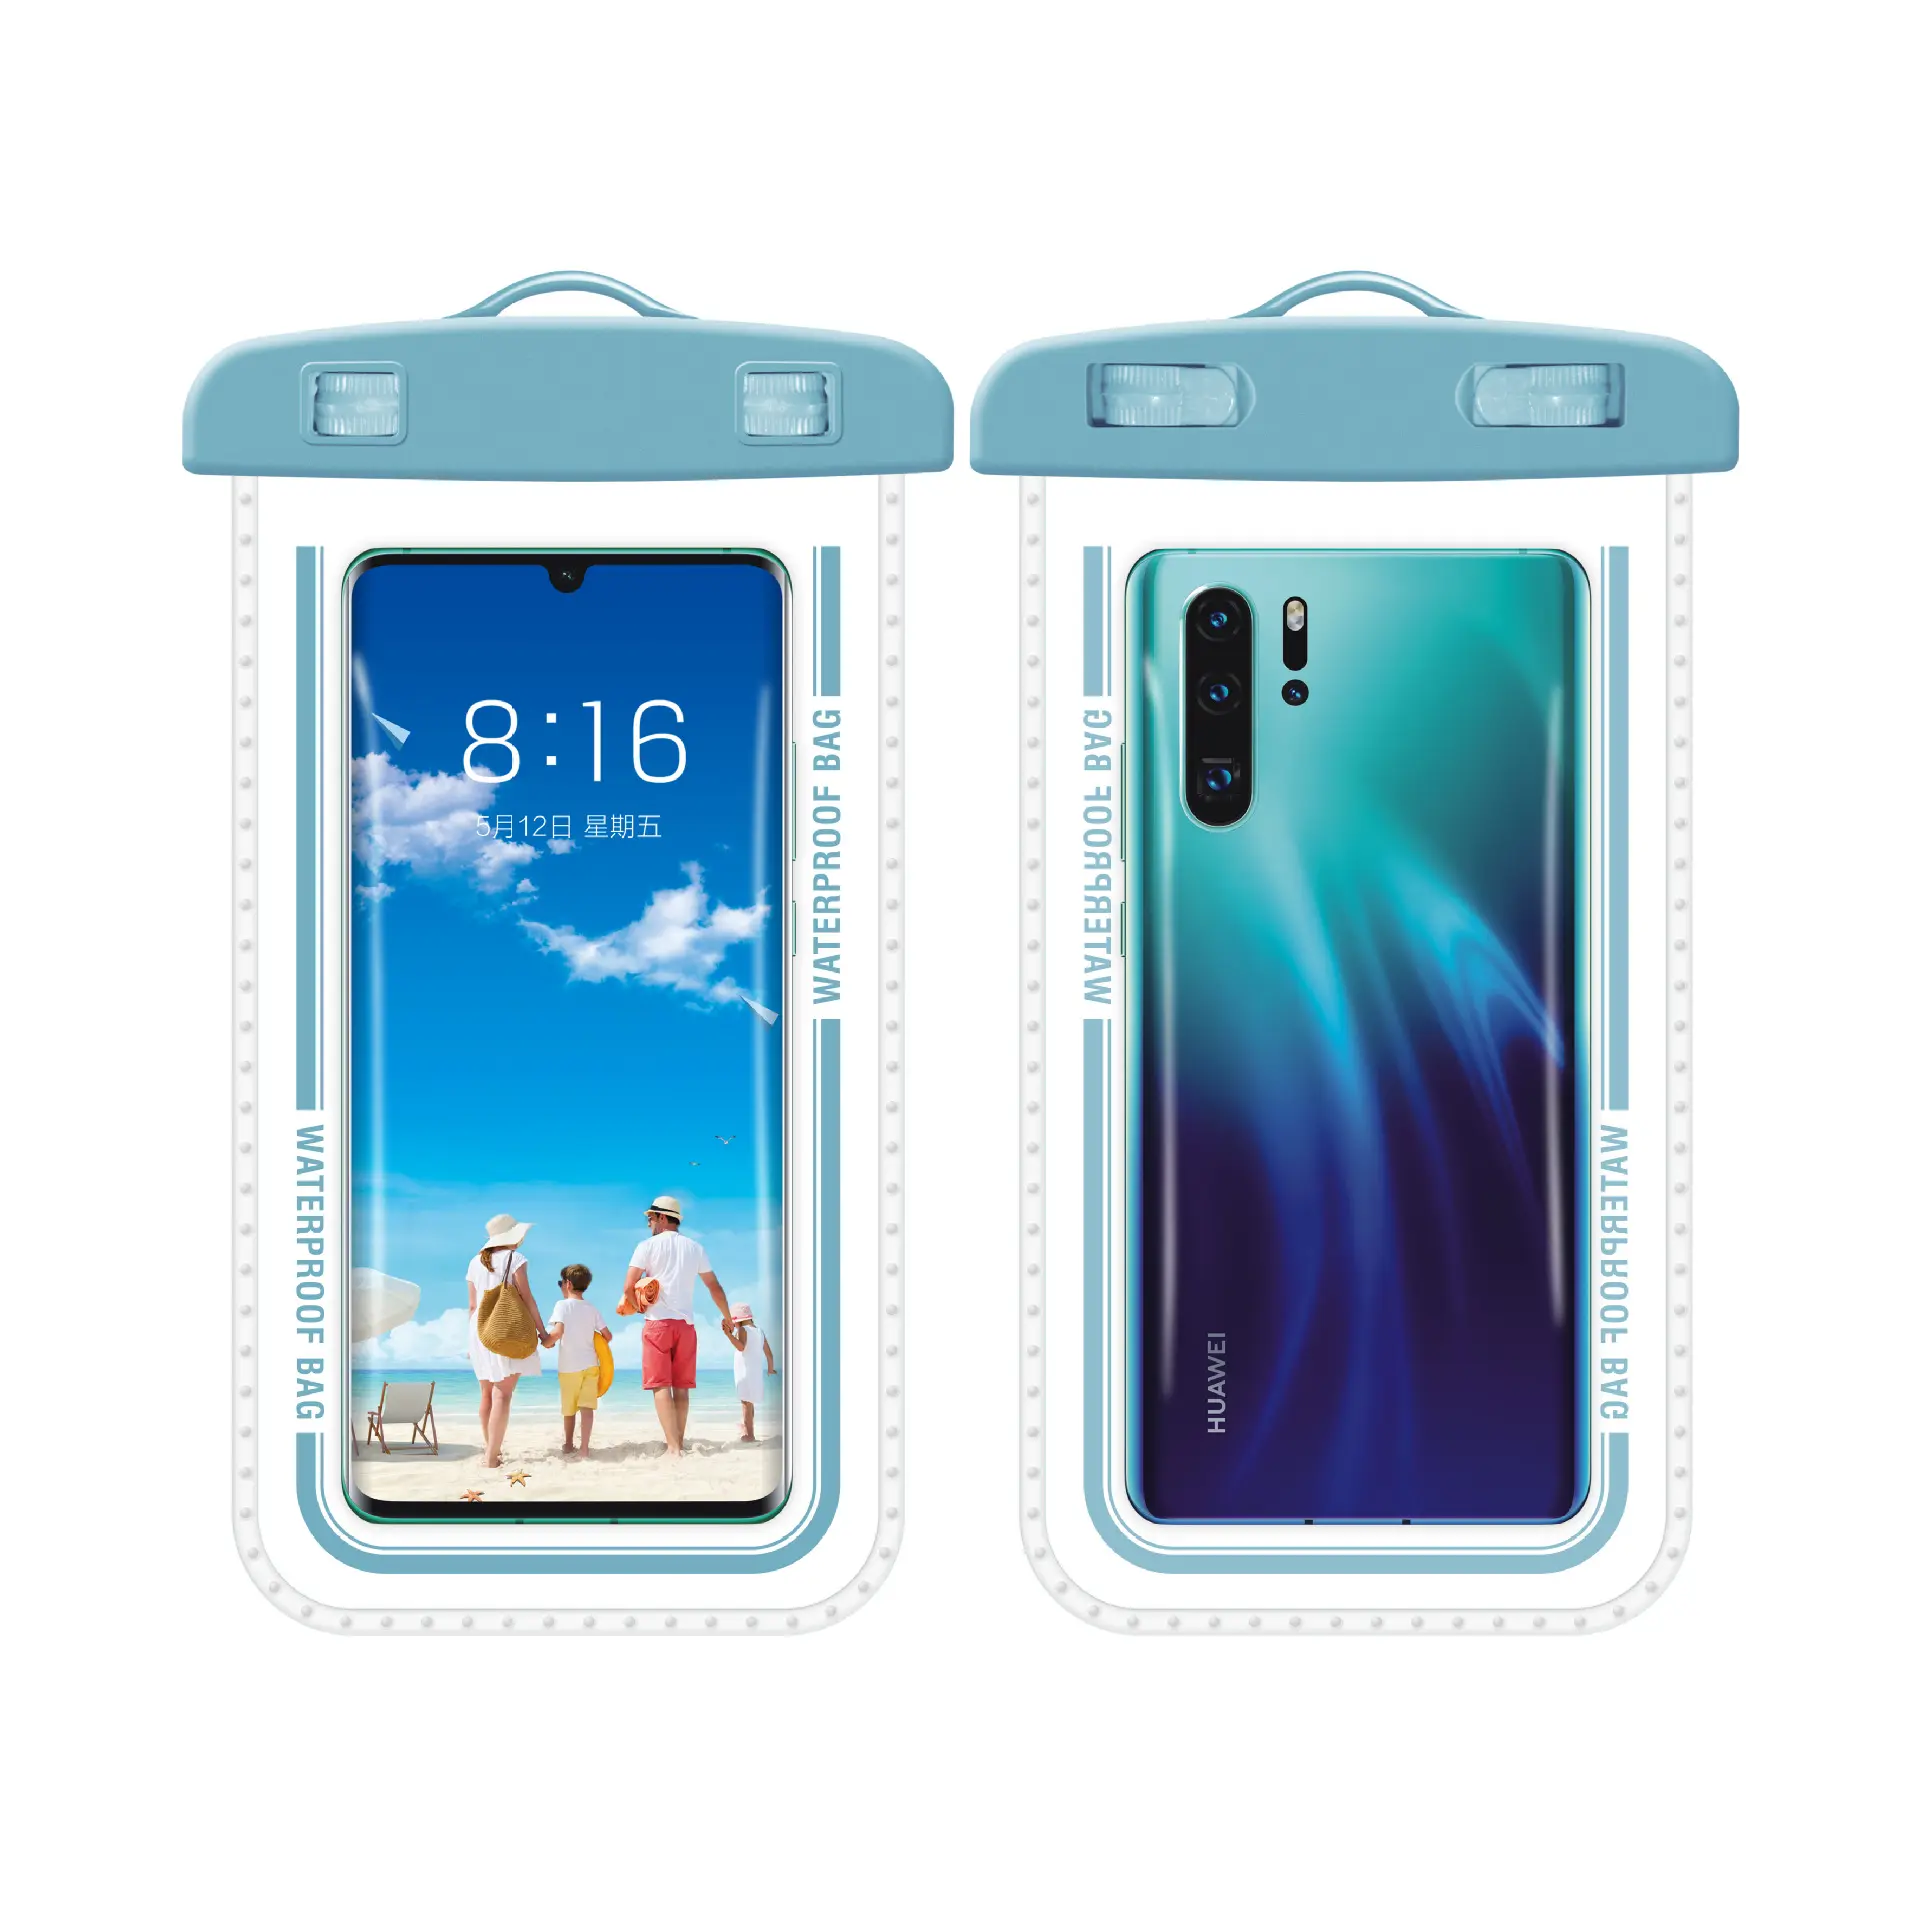 Waterproof Phone Pouch with Lanyard Compatible for iPhone 12 Pro 11 Pro Samsung Galaxy s10/s9,Pixel 4 XL up Waterproof Phone Bag